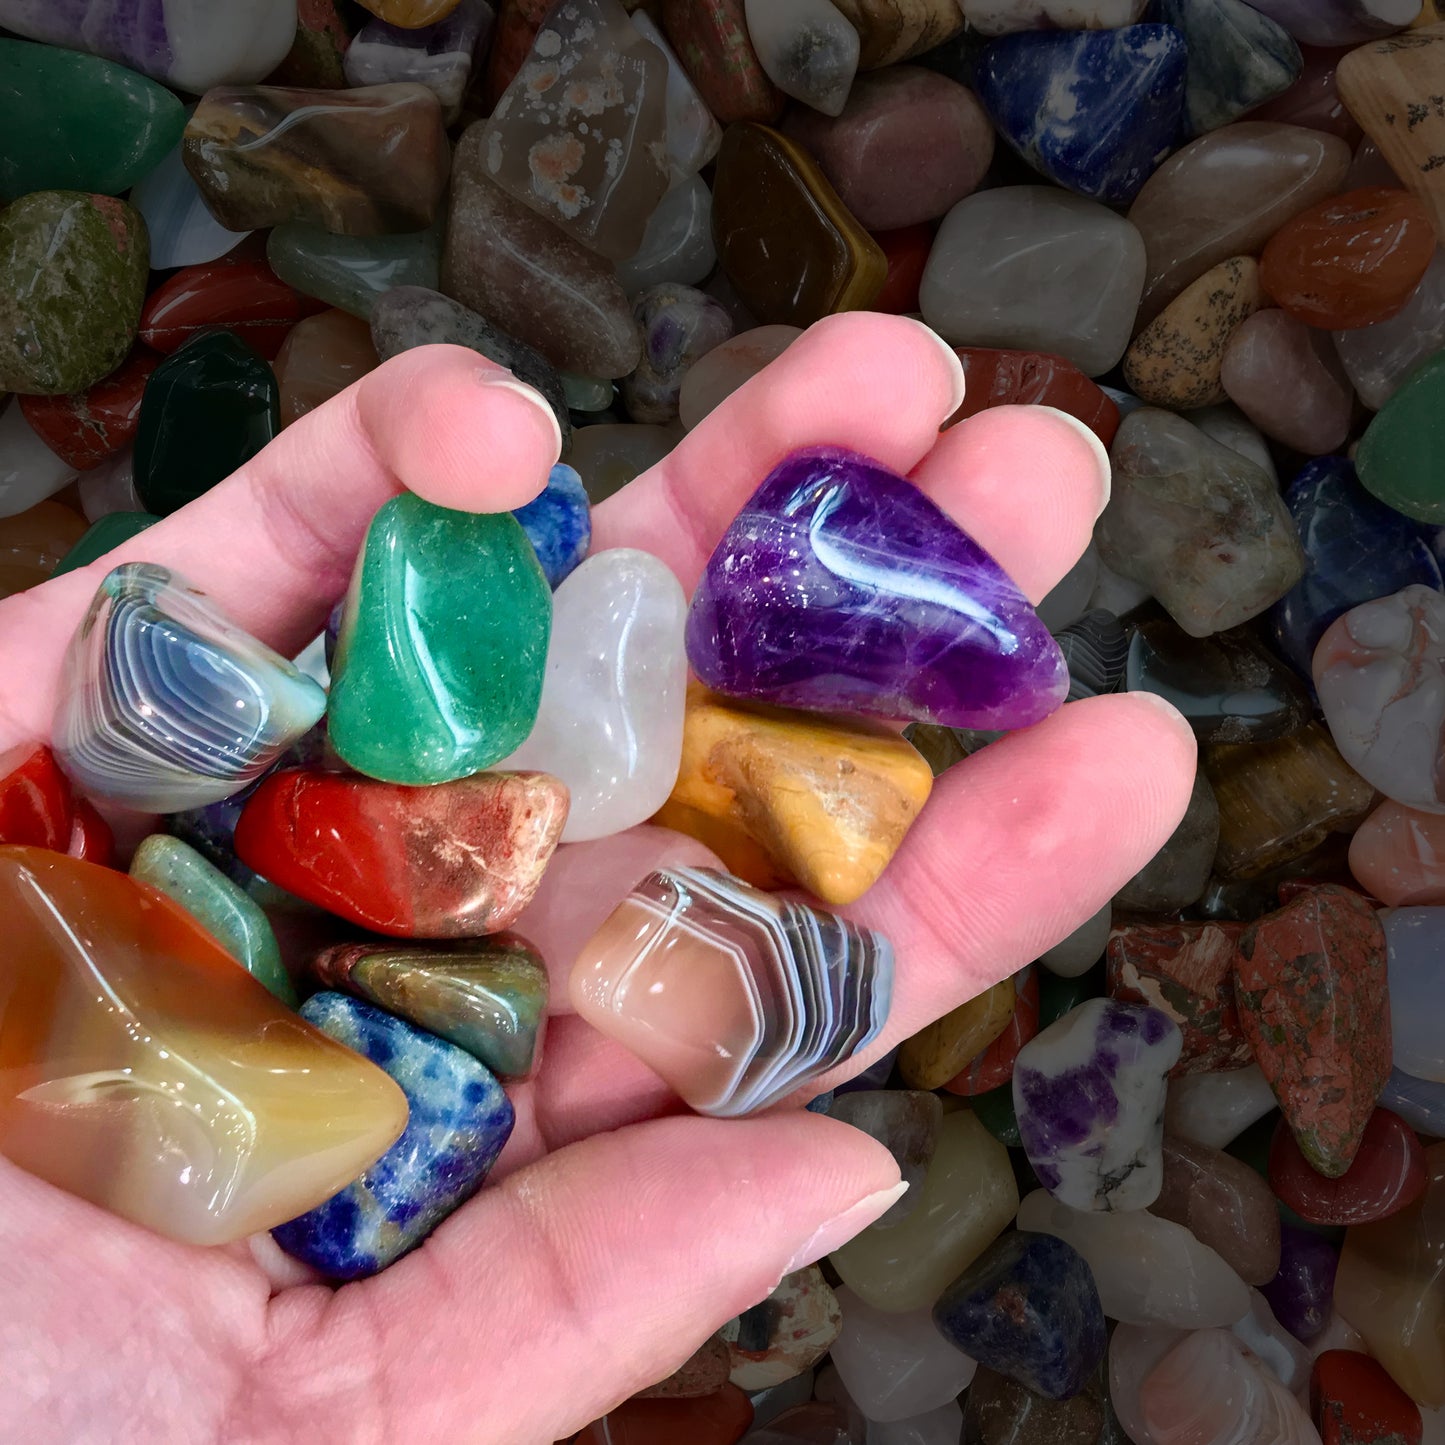 Tumble polished stones and rocks in a hand, showing agate, amethyst, sodalite, and jasper.